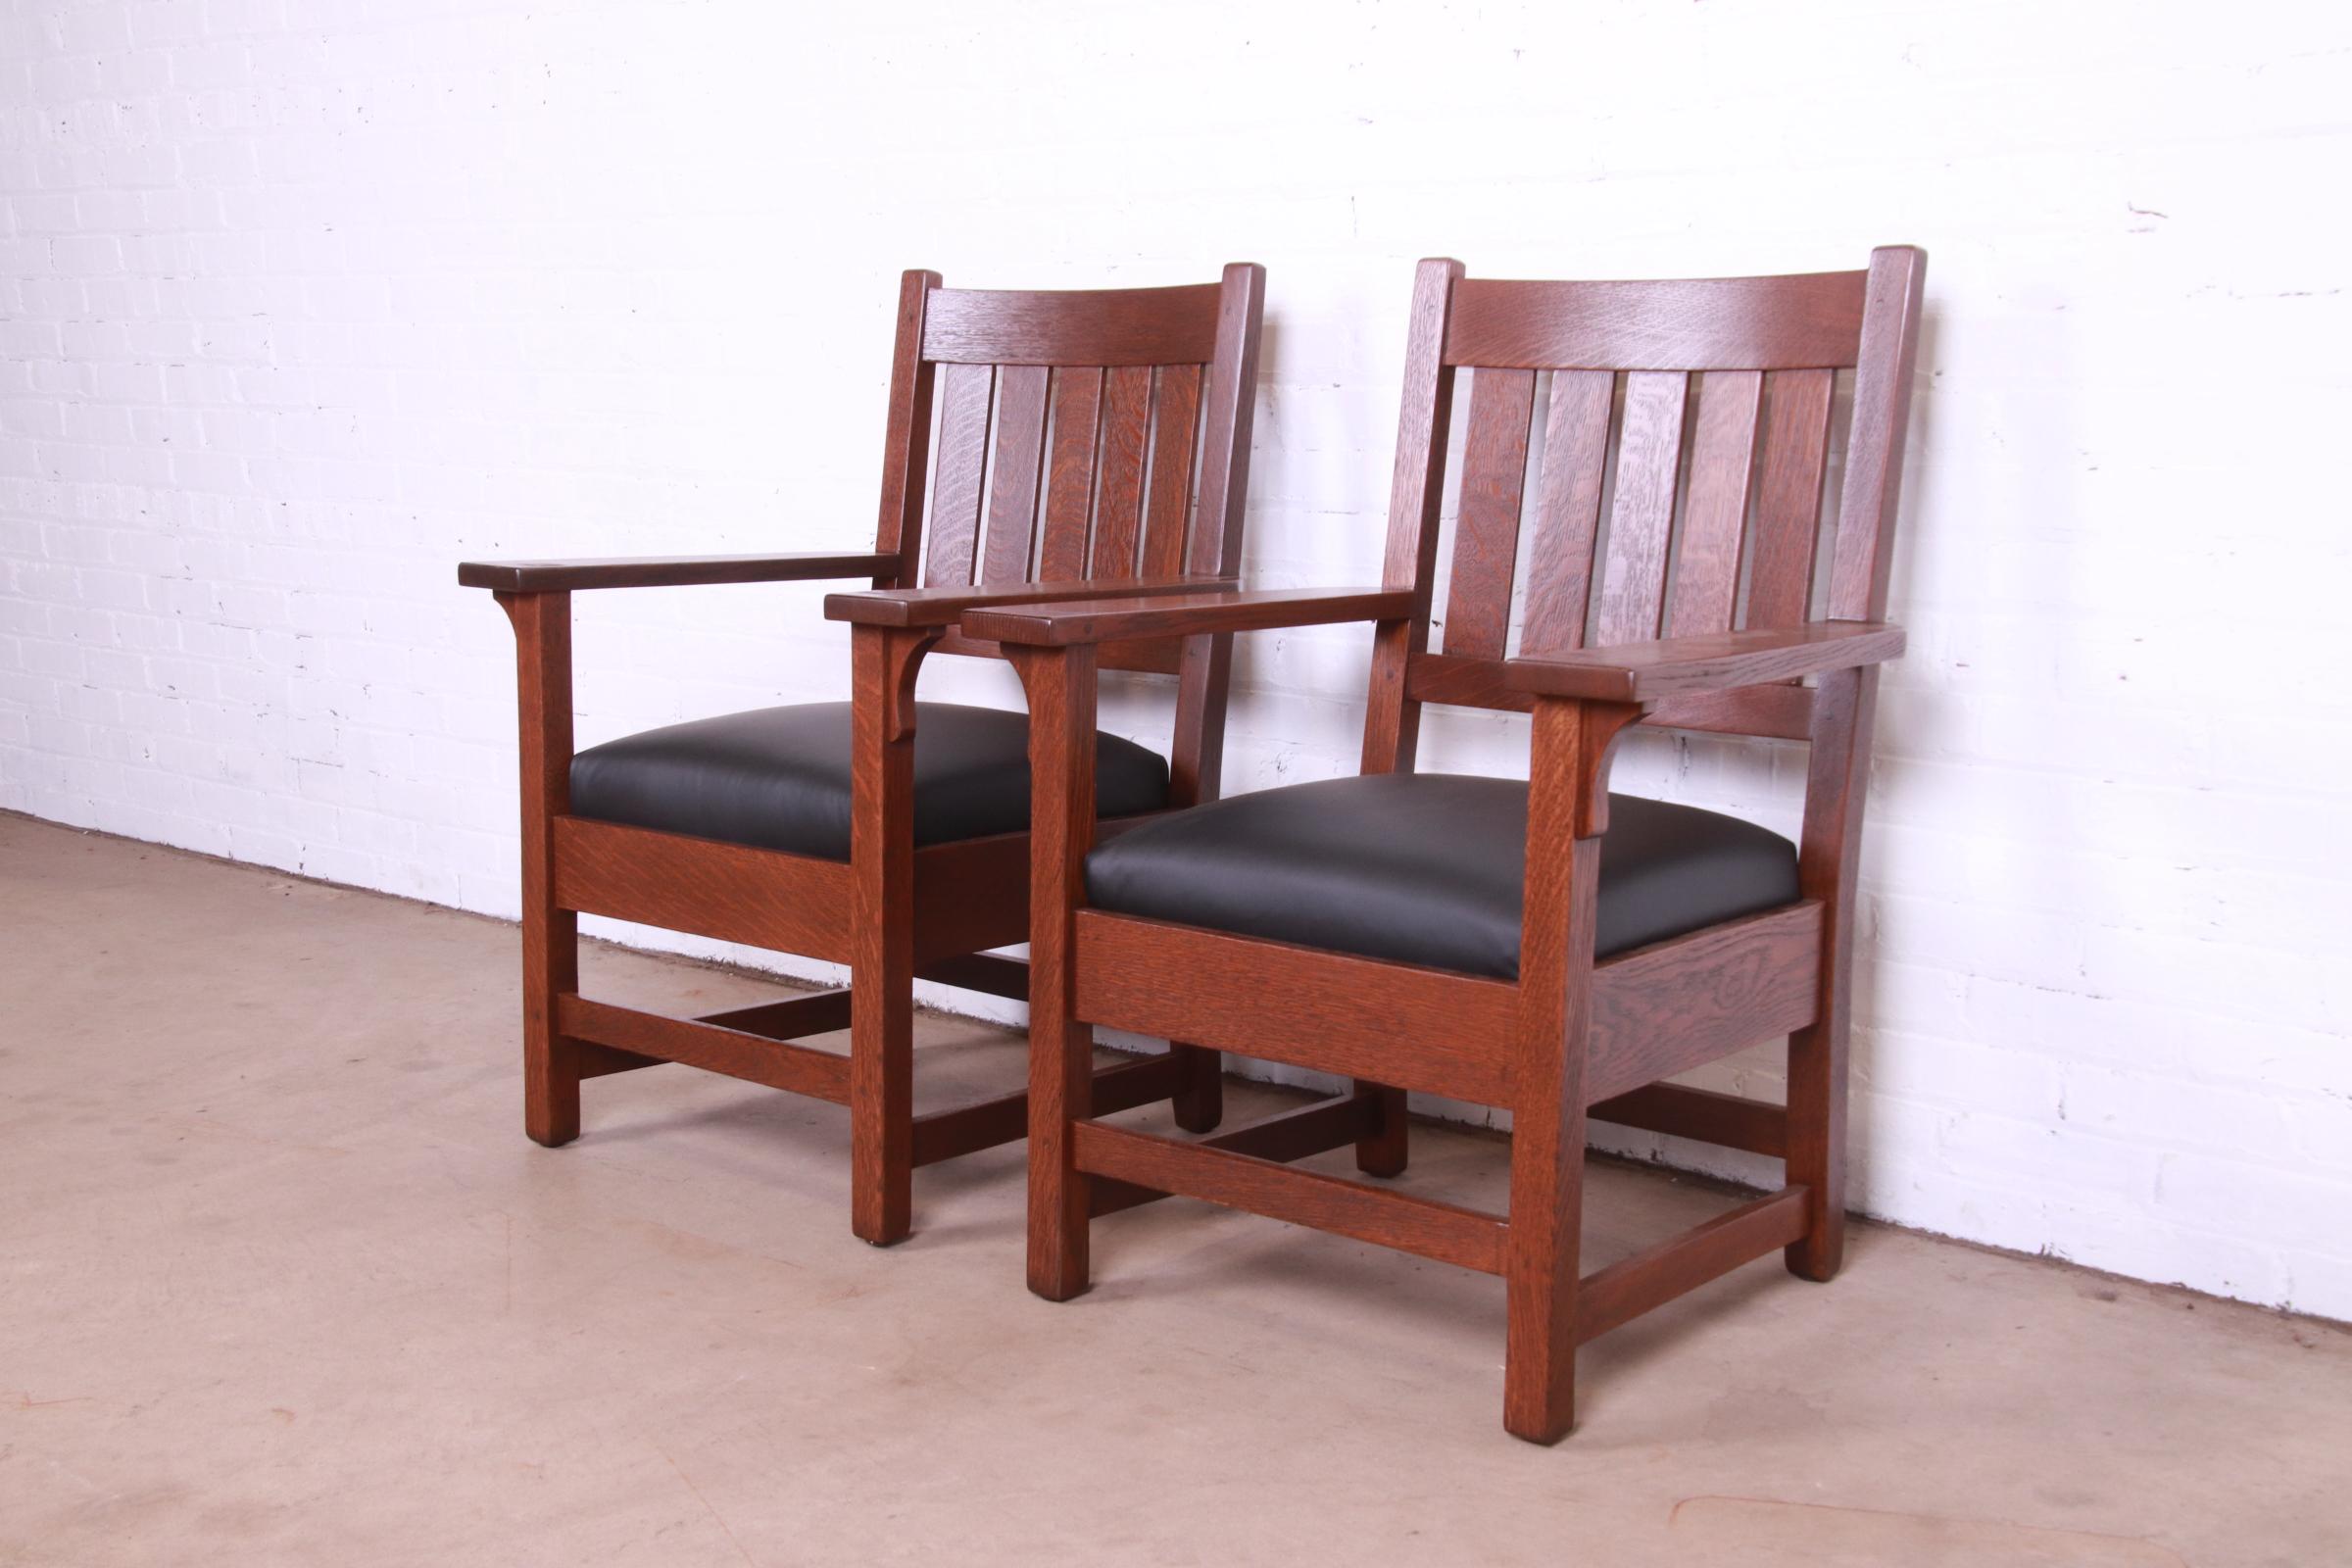 20th Century Gustav Stickley Mission Oak Arts & Crafts Lounge Chairs, Fully Restored